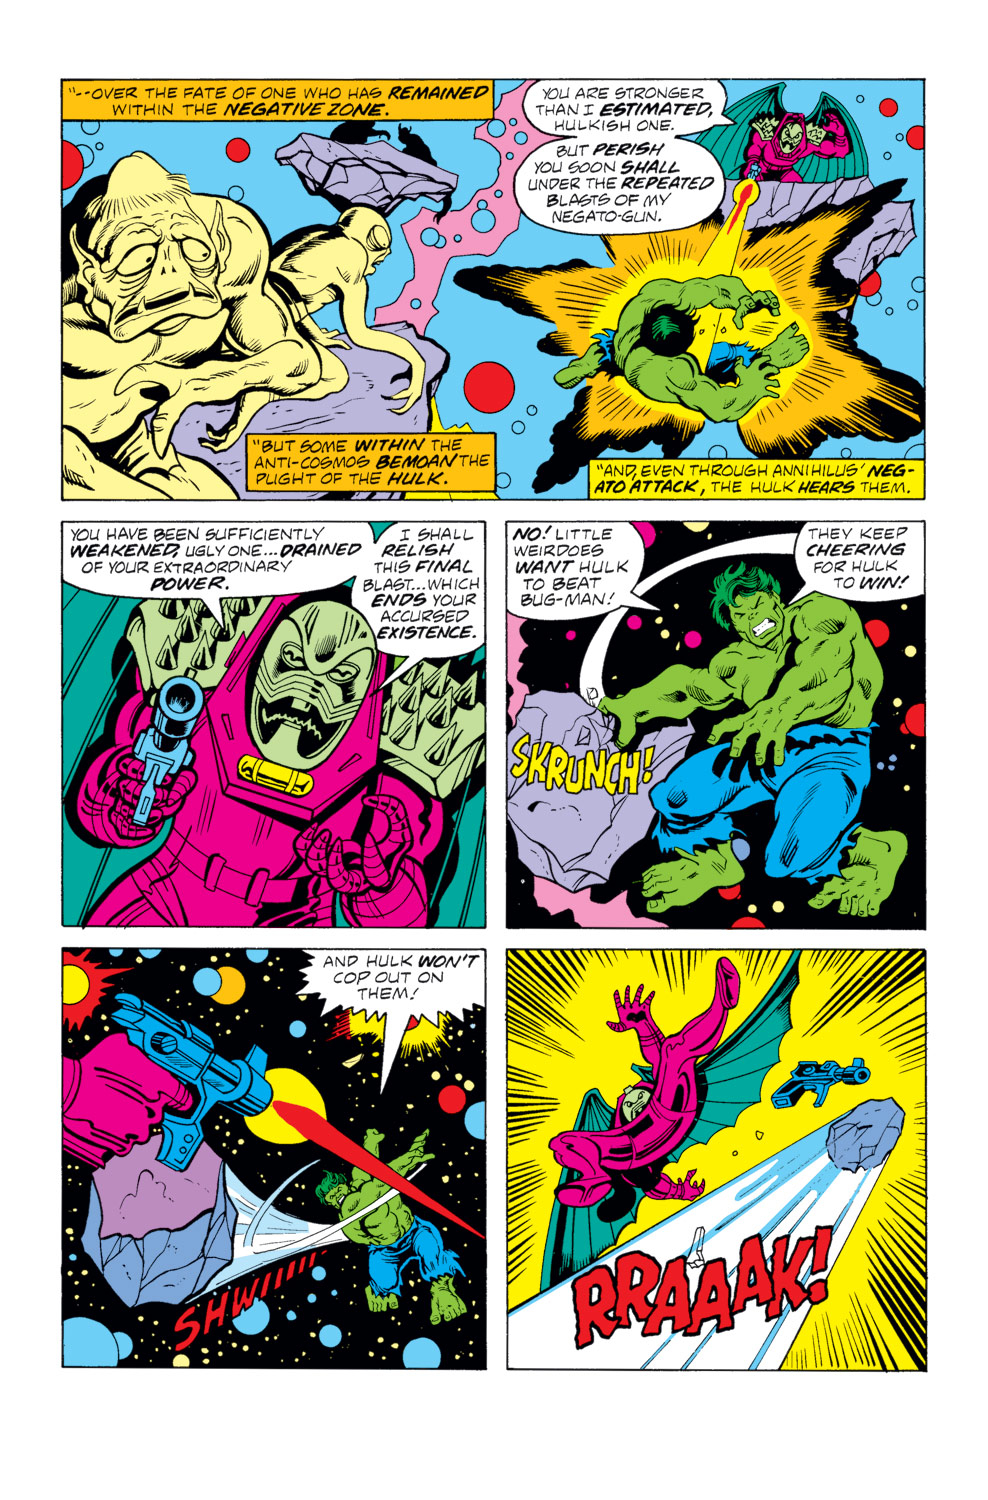 What If? (1977) issue 12 - Rick Jones had become the Hulk - Page 31